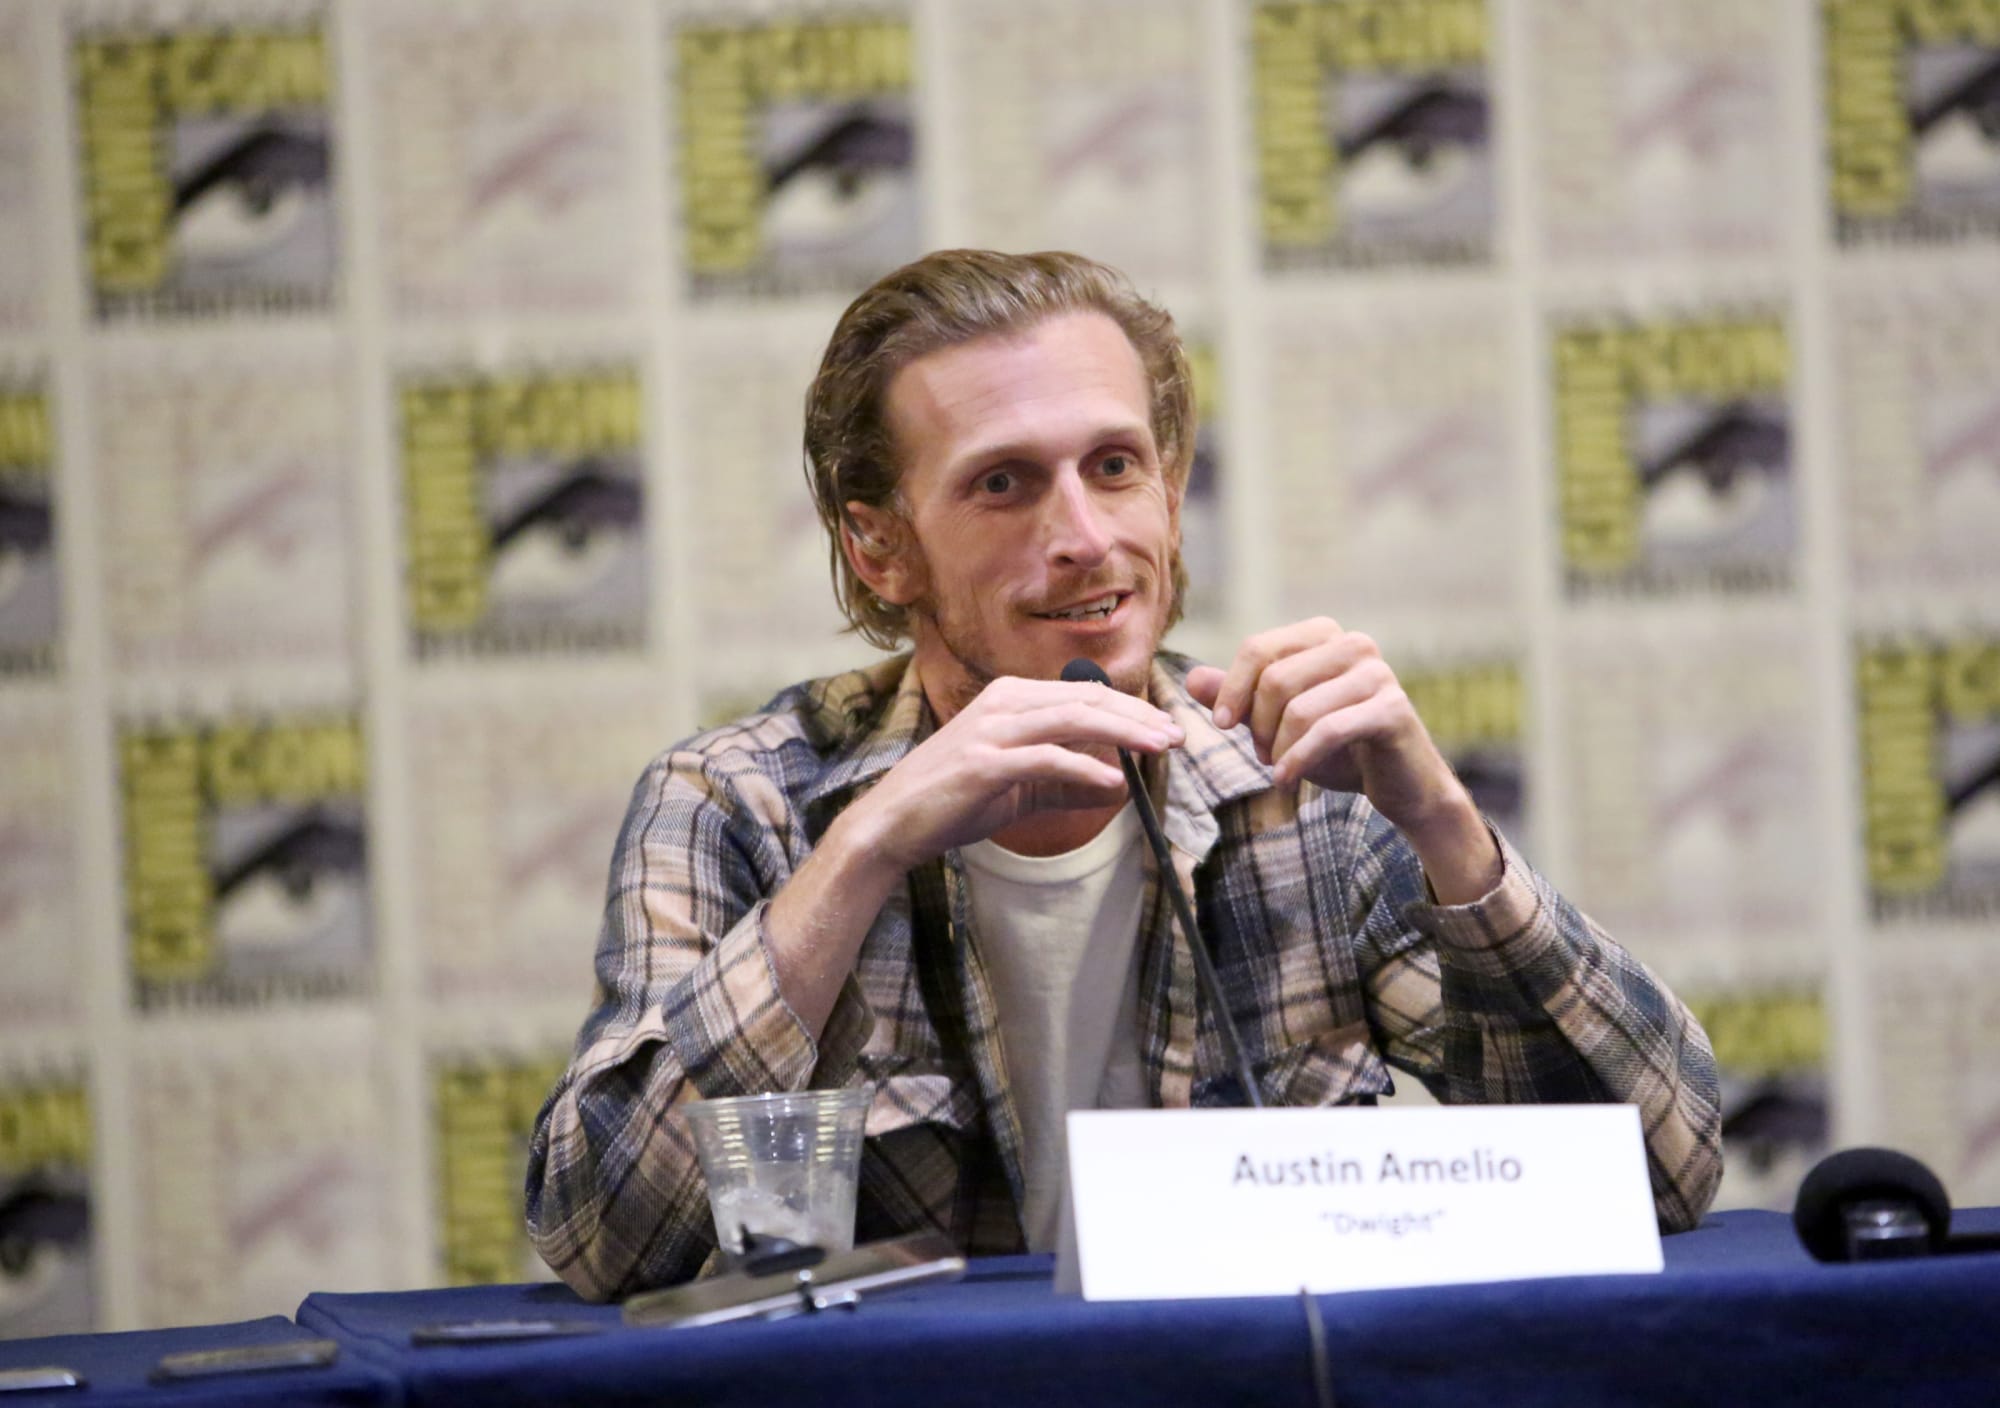 Fear Twd Star Austin Amelio Is Creating Some Smoking Hot Art